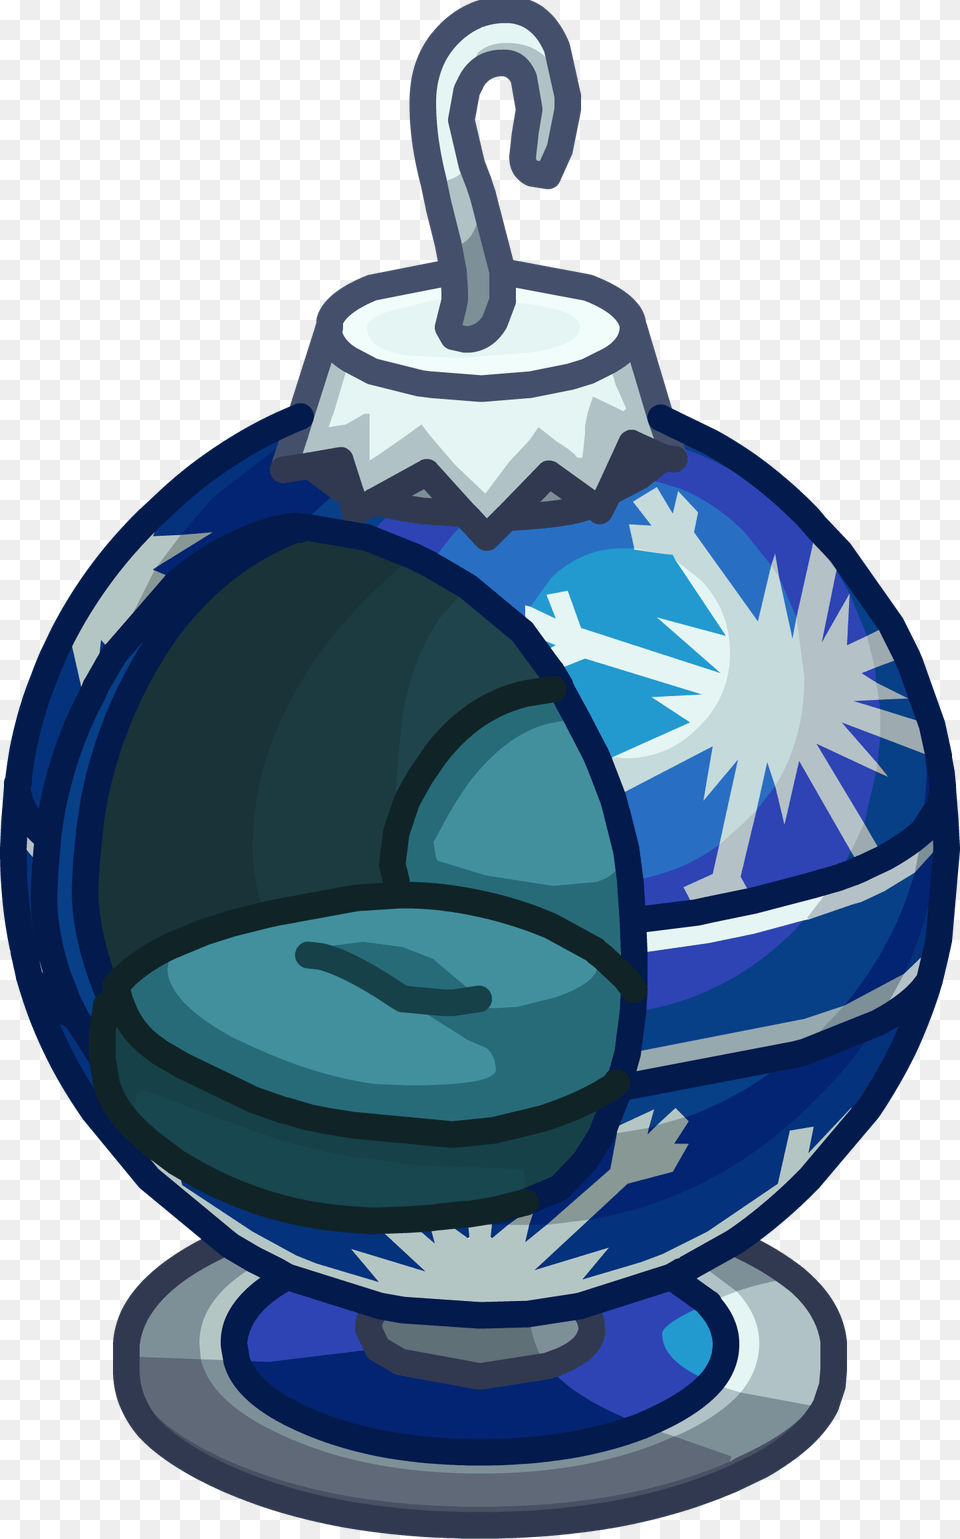 Club Penguin Wiki Club Penguin Egg Chair, Pottery, Ammunition, Grenade, Weapon Png